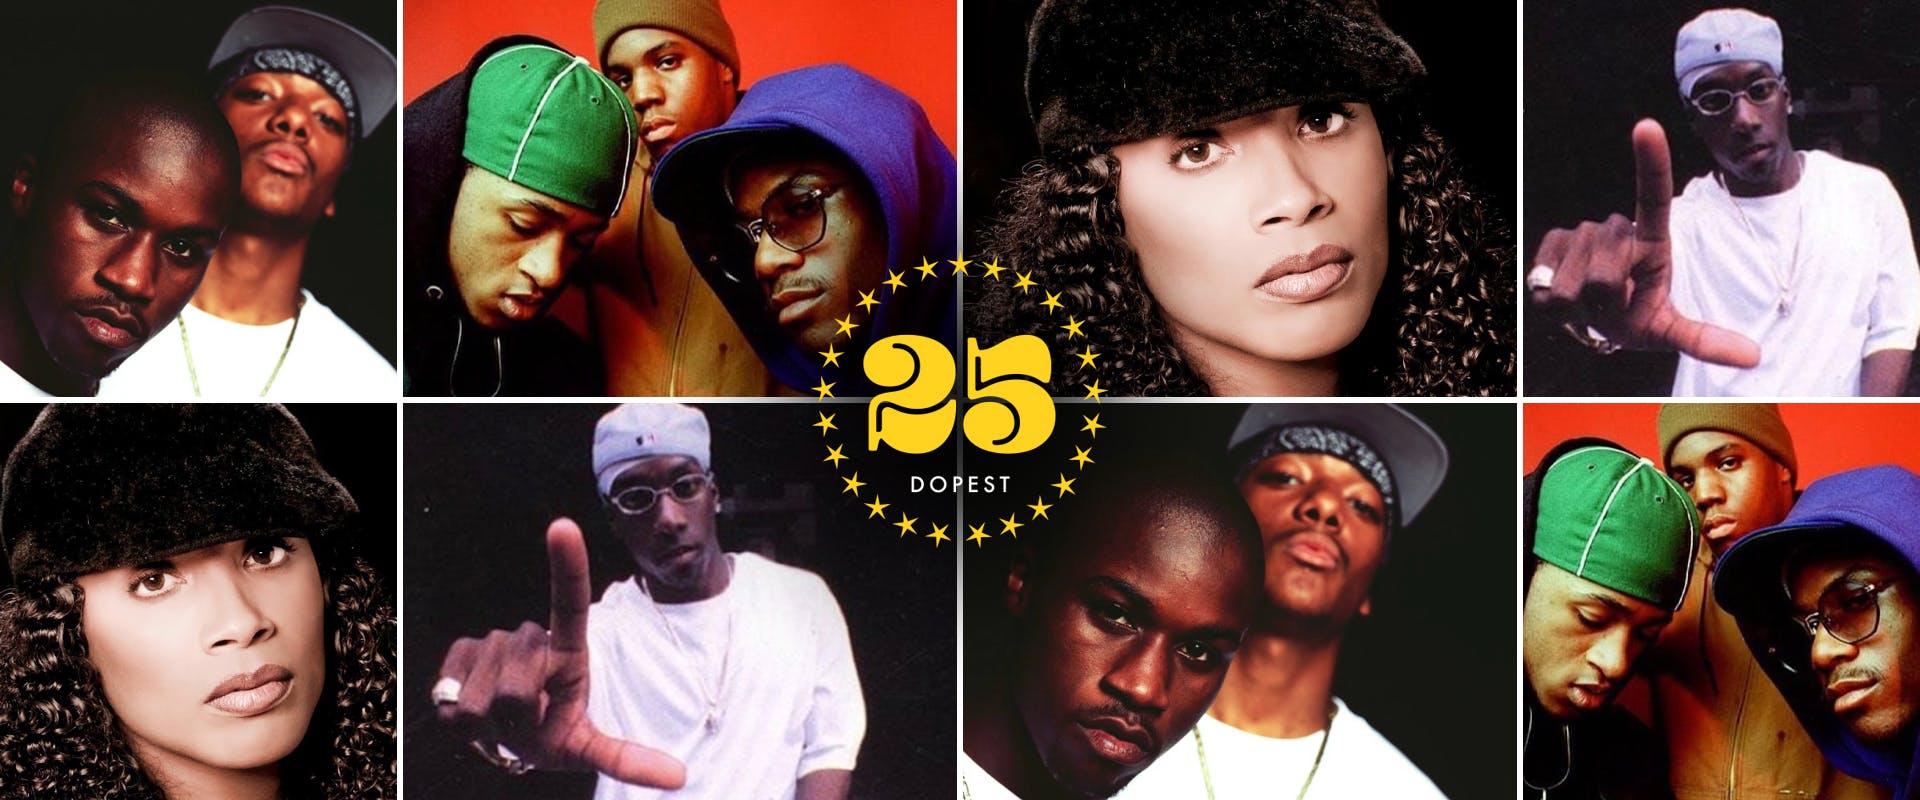 To the East: The 25 Dopest Boom Bap Songs